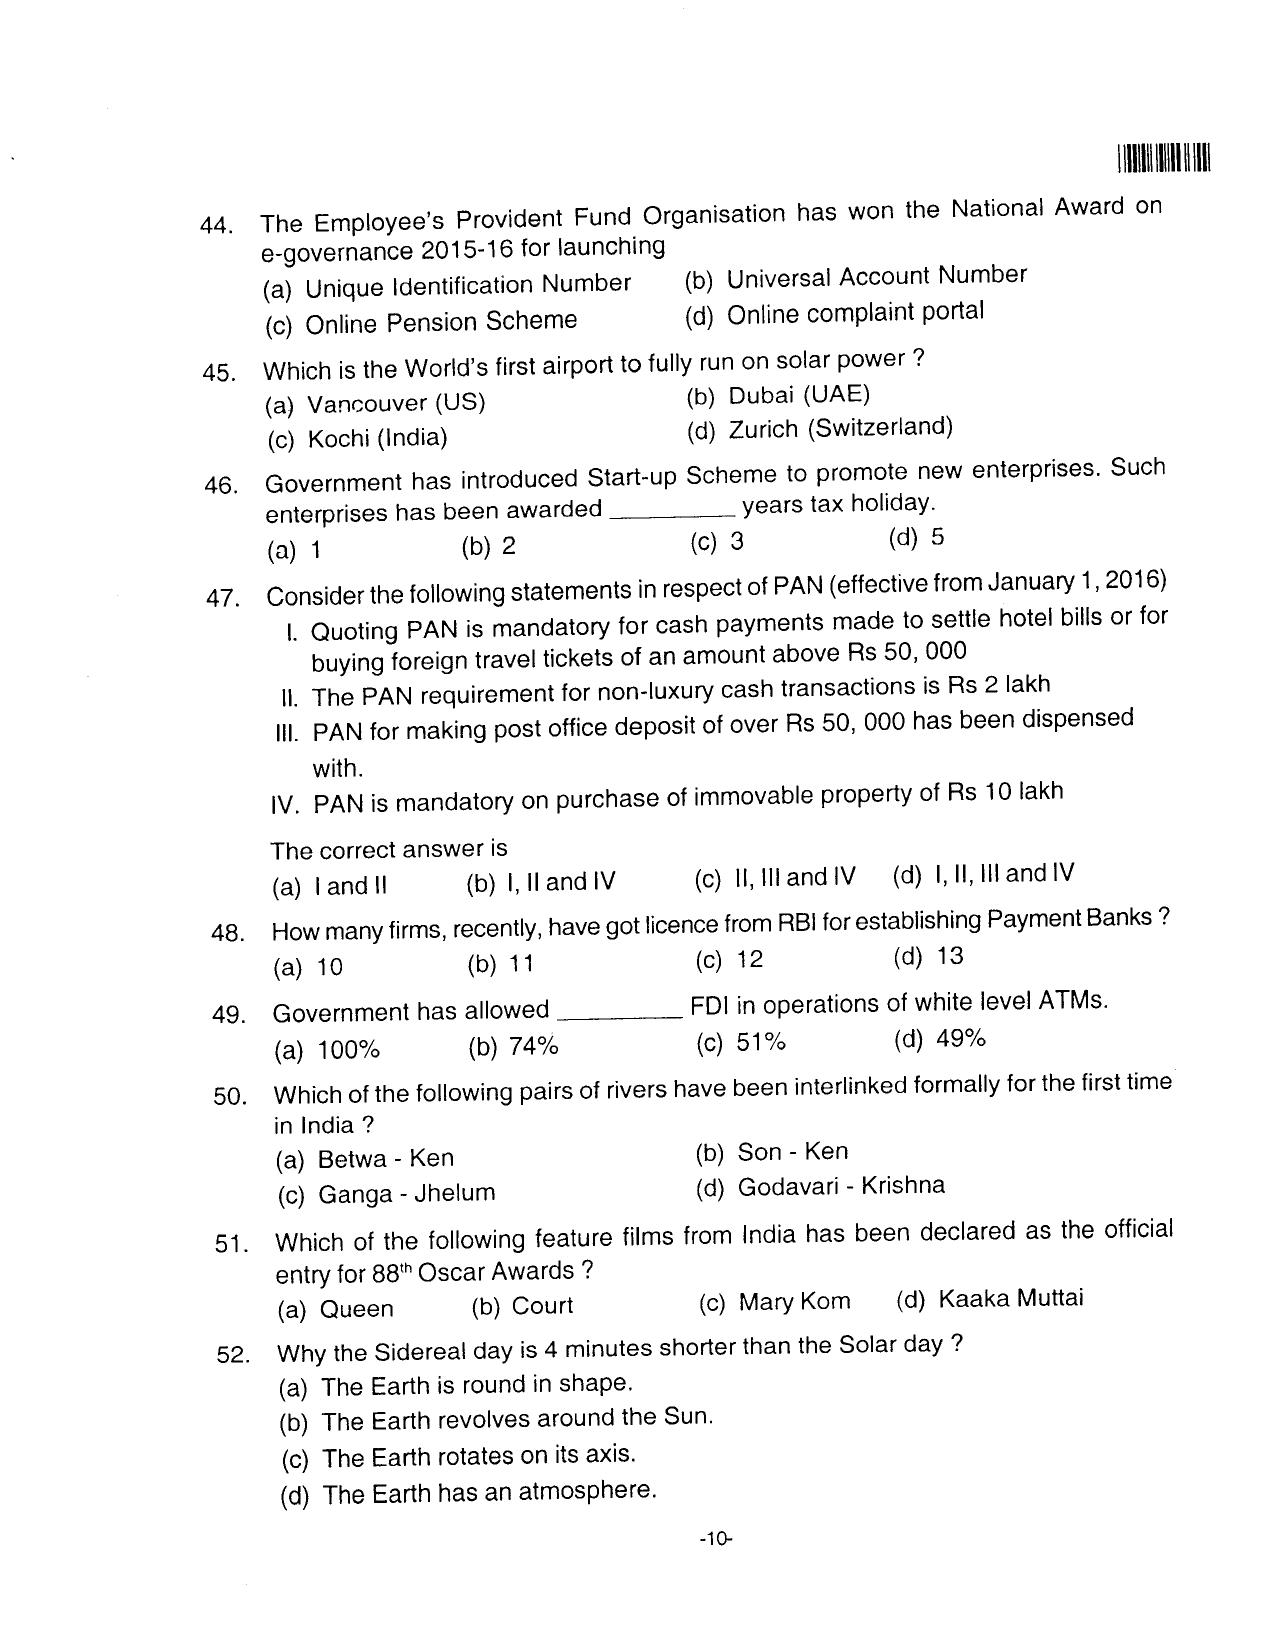 AILET 2016 Question Paper for BA LLB - Page 10